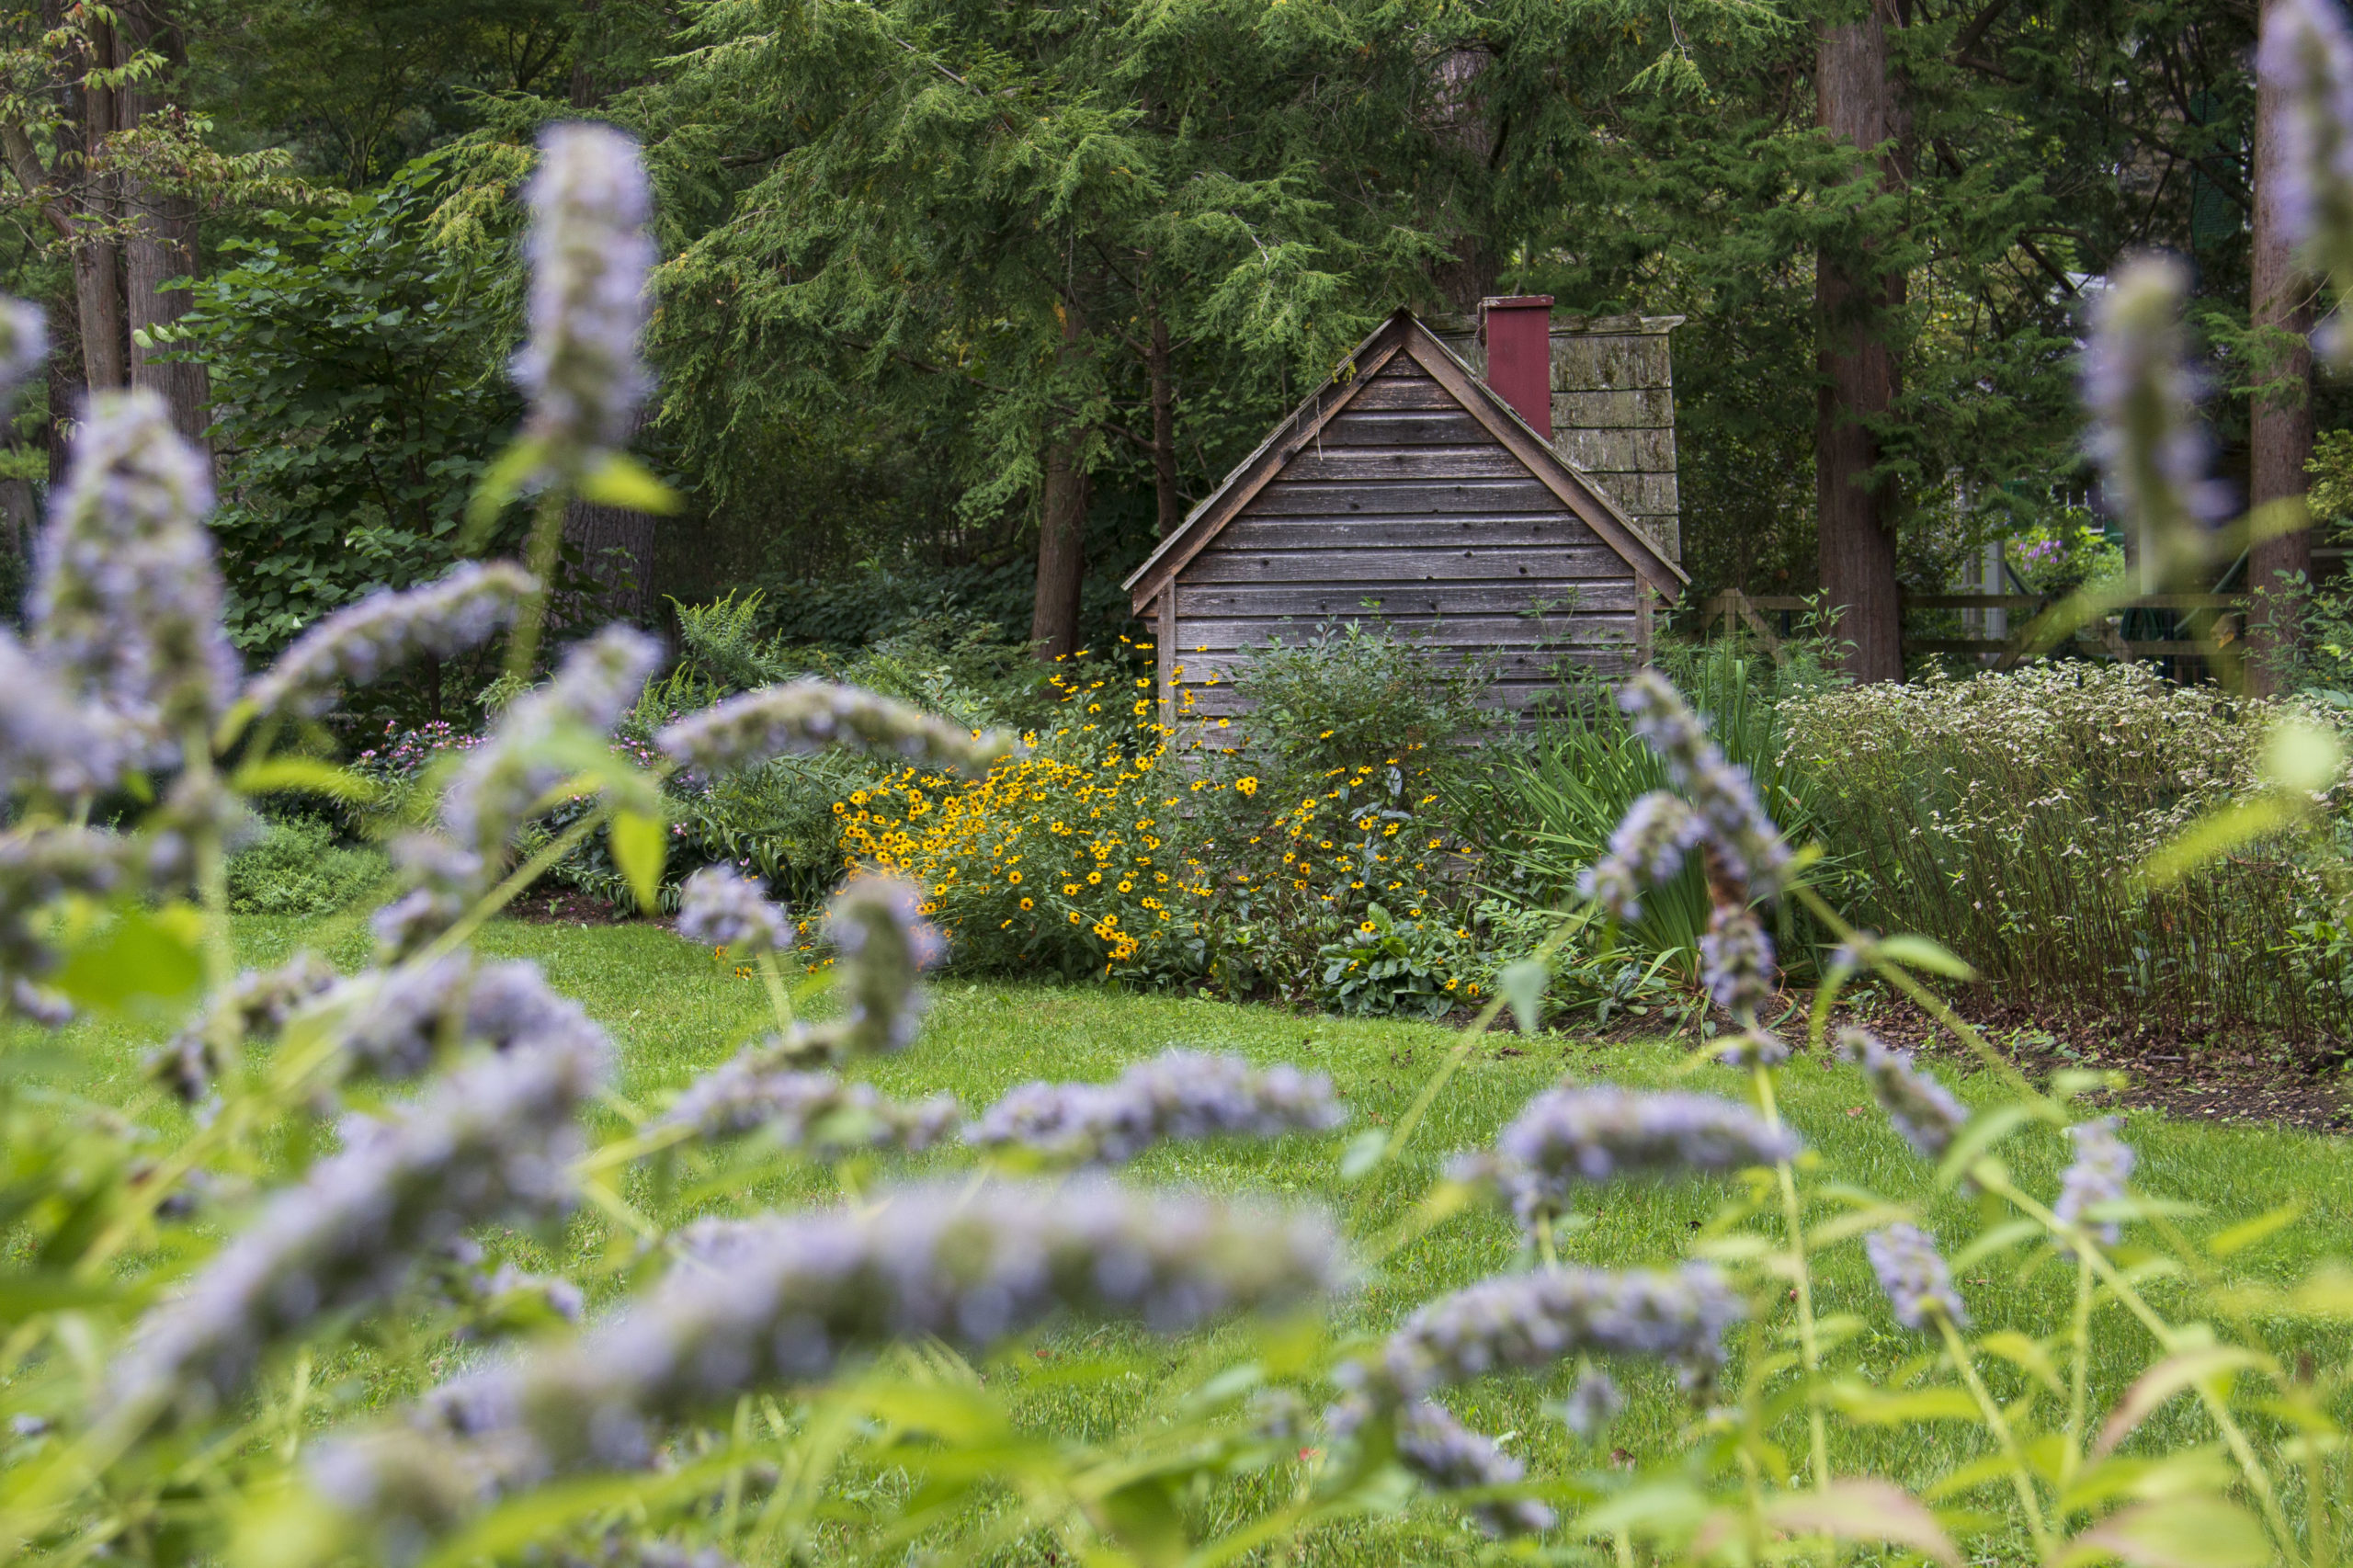 A mossy wooden playhouse is nestled between stands of blooming perennials under a canopy of conifers.